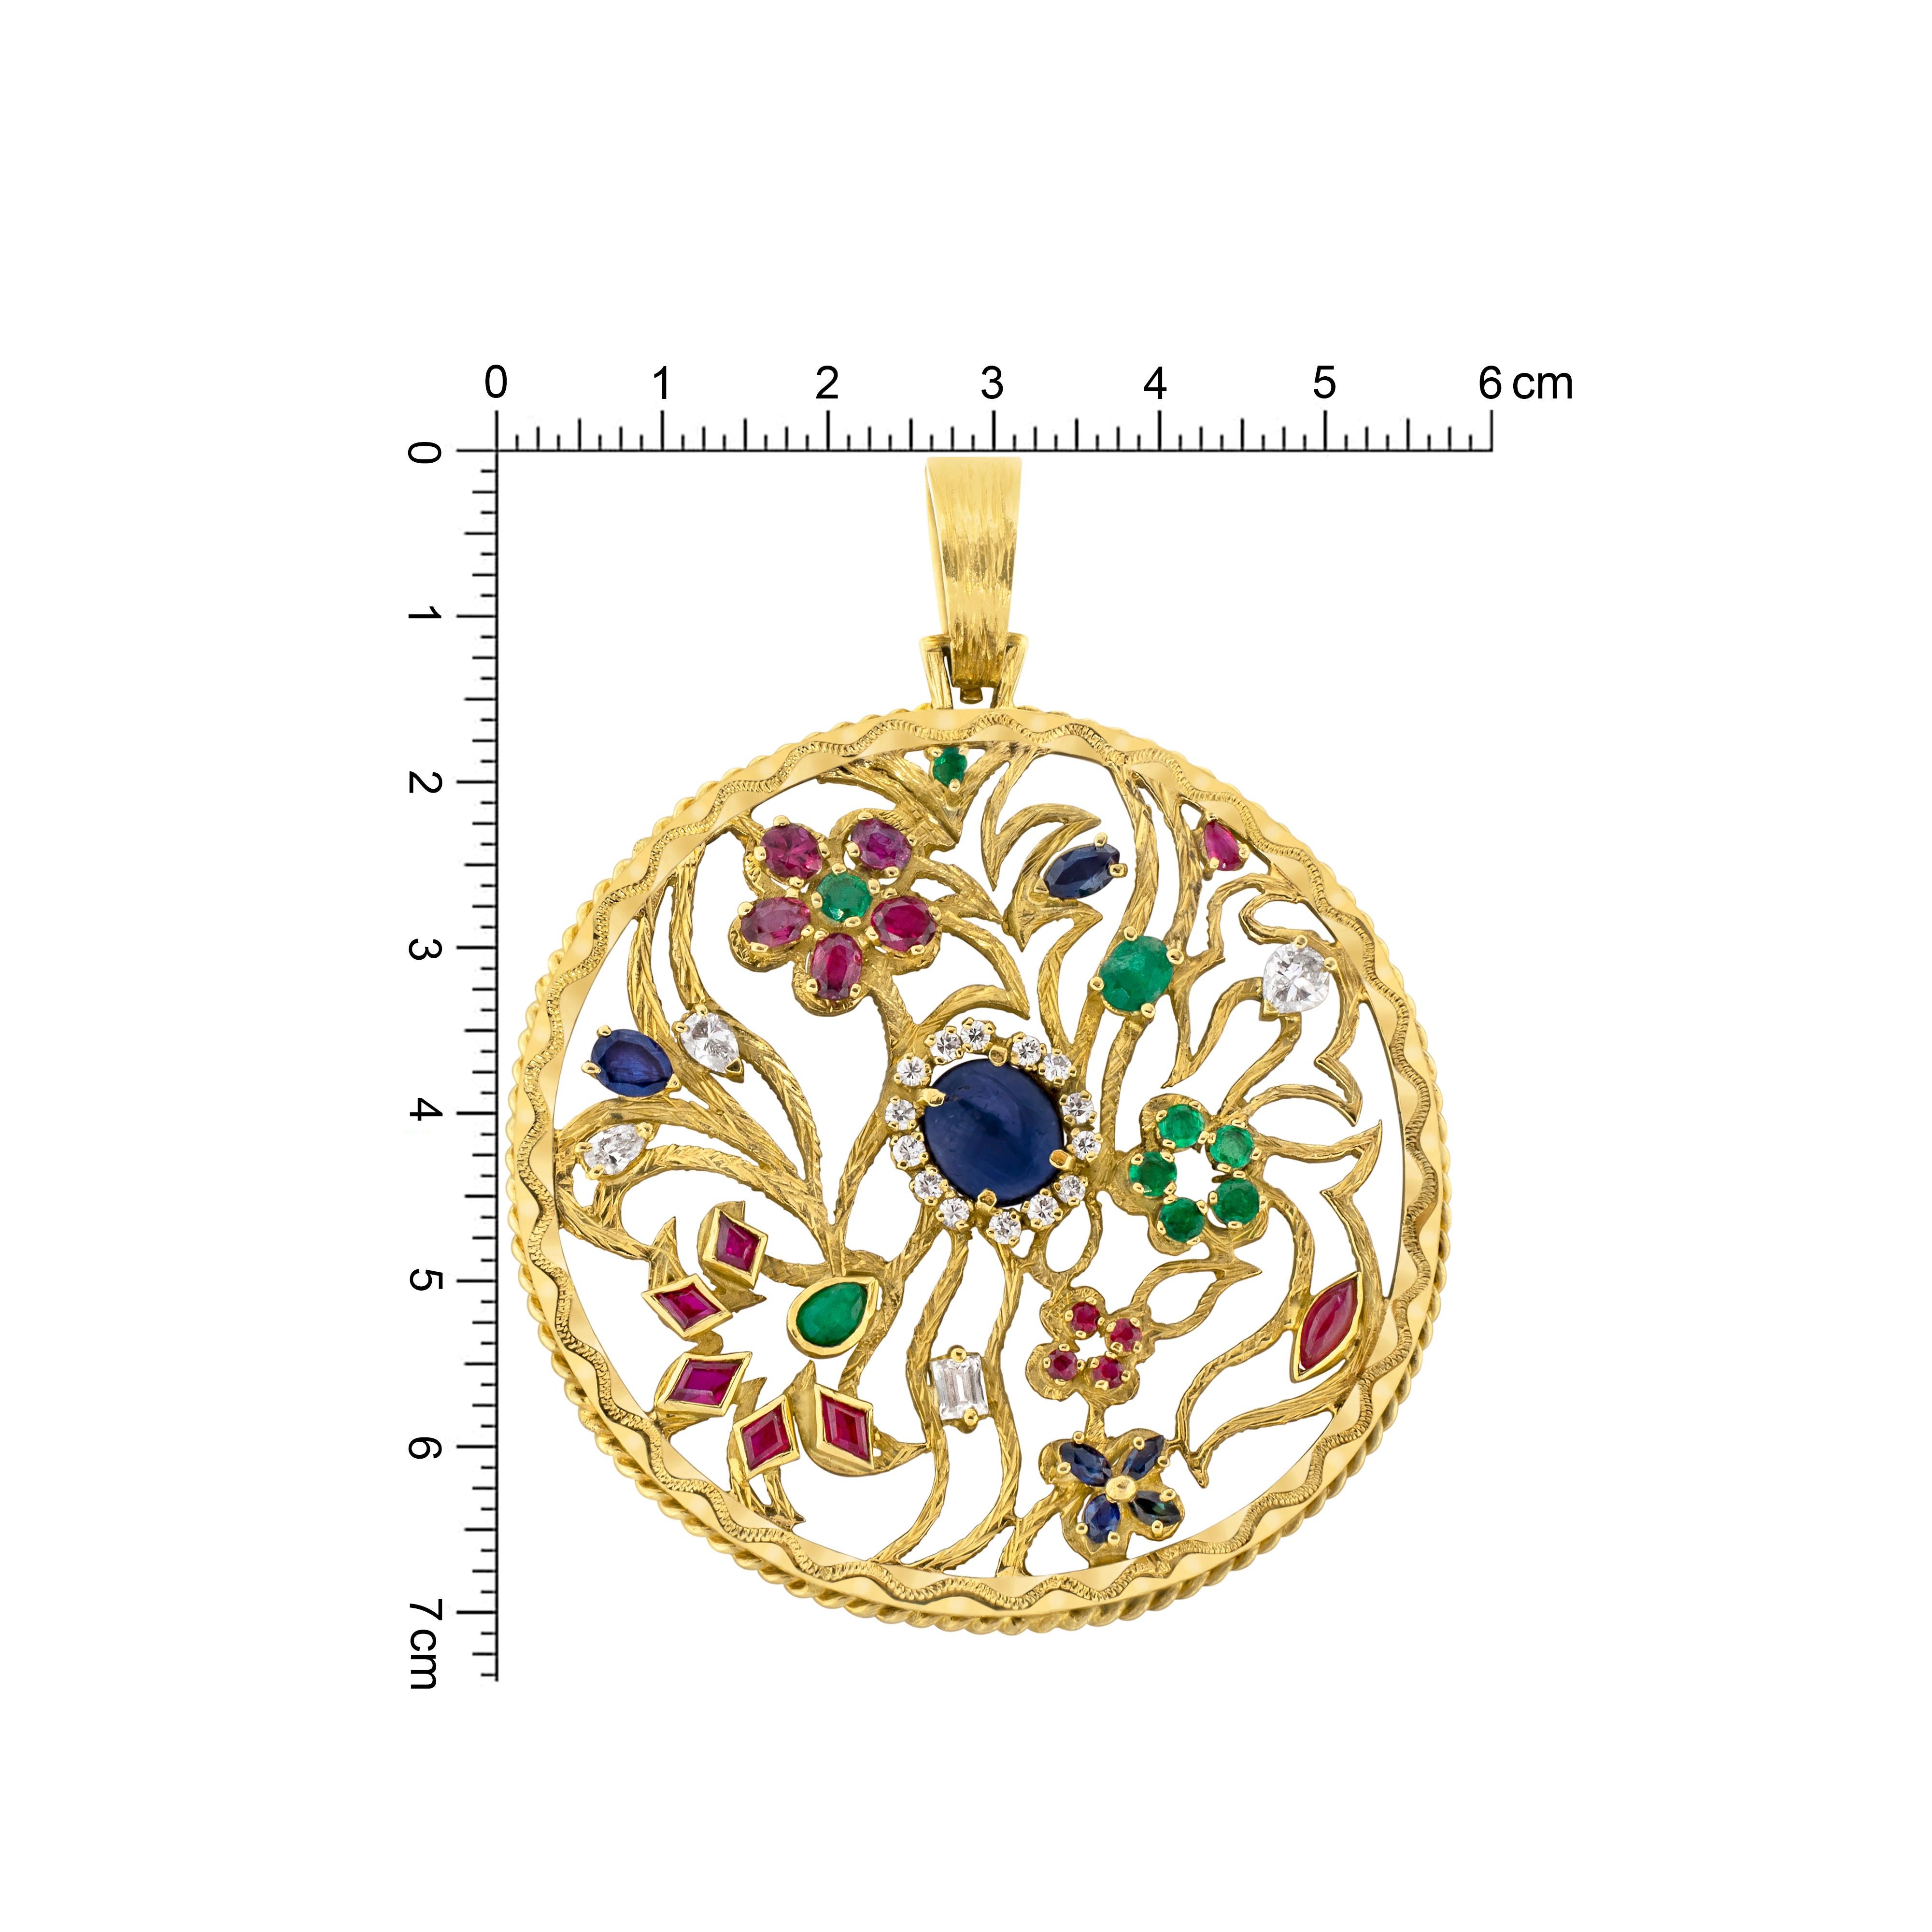 This magnificent 18 carat yellow gold pendant by Ben Rosenfeld features an incredible array of precious mixed cut gemstones including diamonds, rubies, emeralds and sapphires.
Some of the precious gemstones are grouped together forming delicate